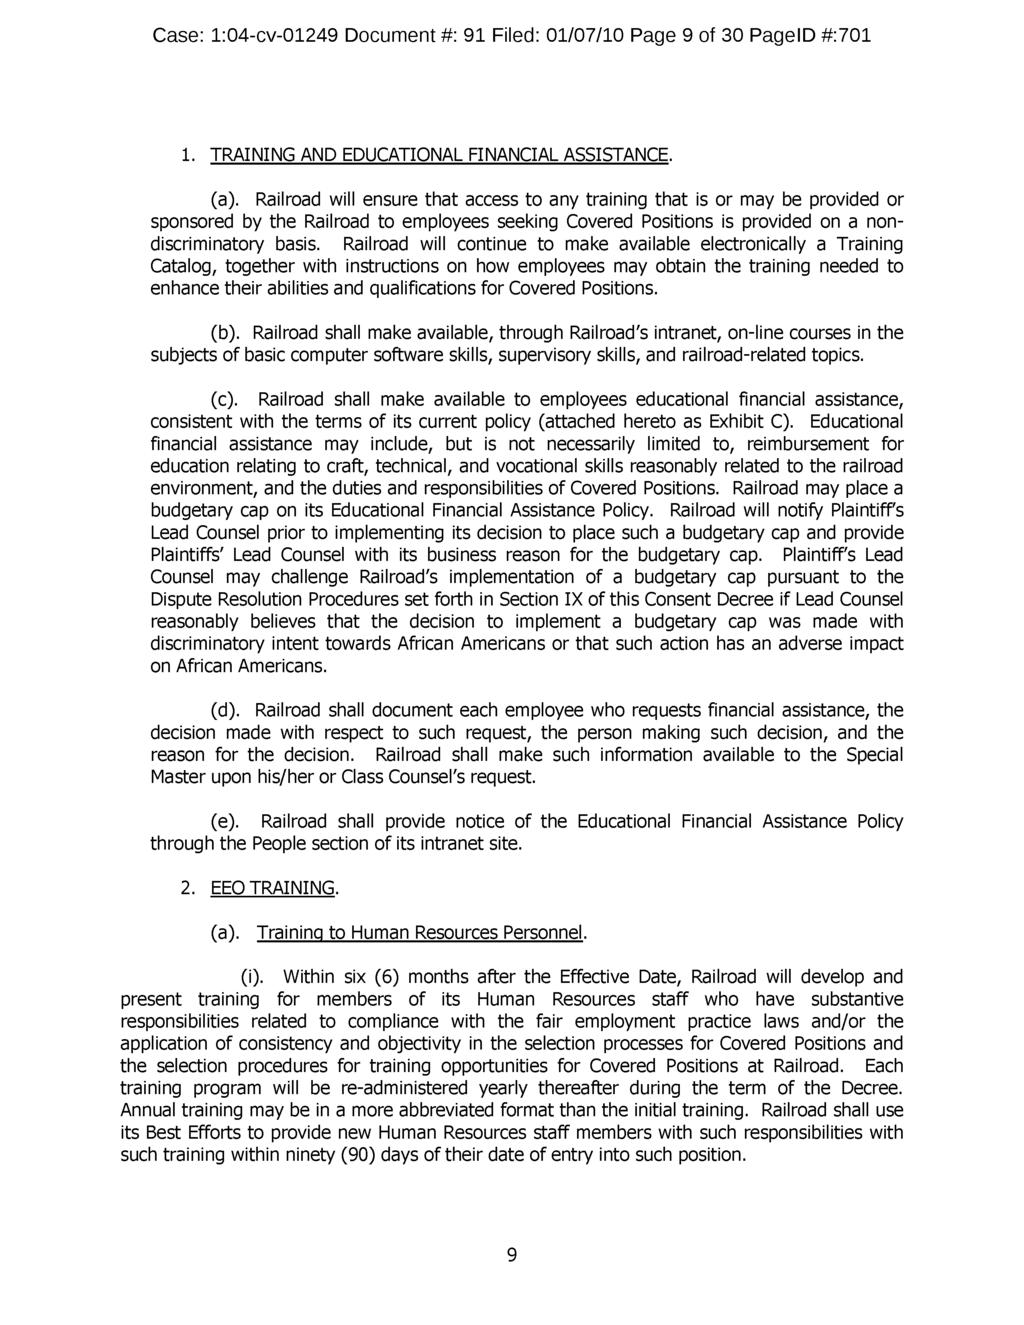 Case: 1:04-cv-01249 Document #: 91 Filed: 01/07/10 Page 9 of 30 PagelD #:701 1. TRAINING AND EDUCATIONAL FINANCIAL ASSISTANCE. (a).